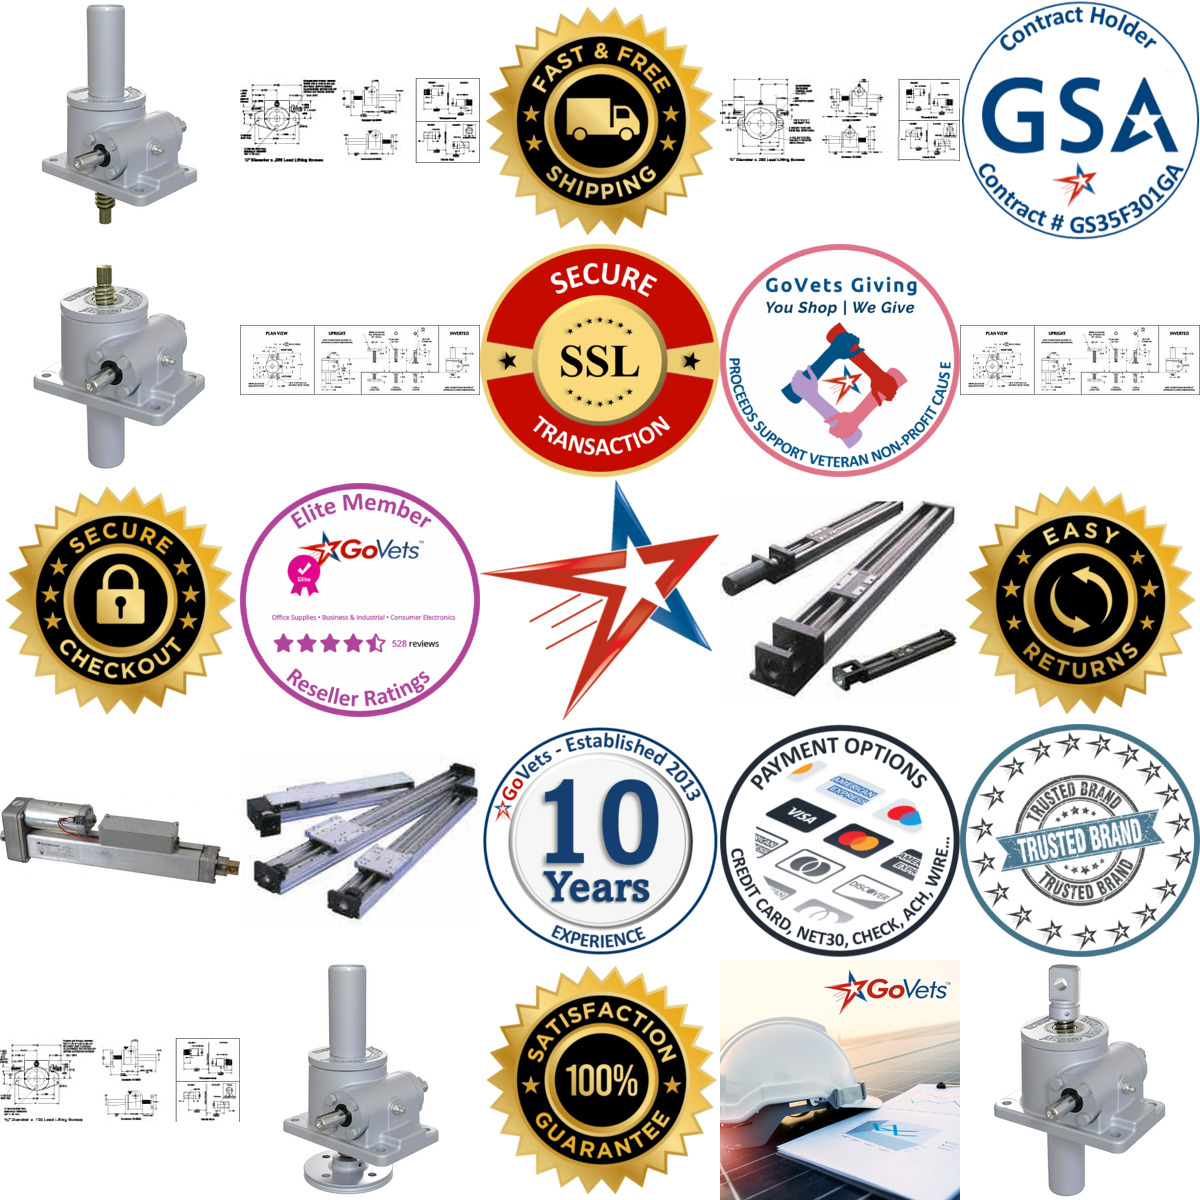 A selection of Linear Motion Actuators products on GoVets